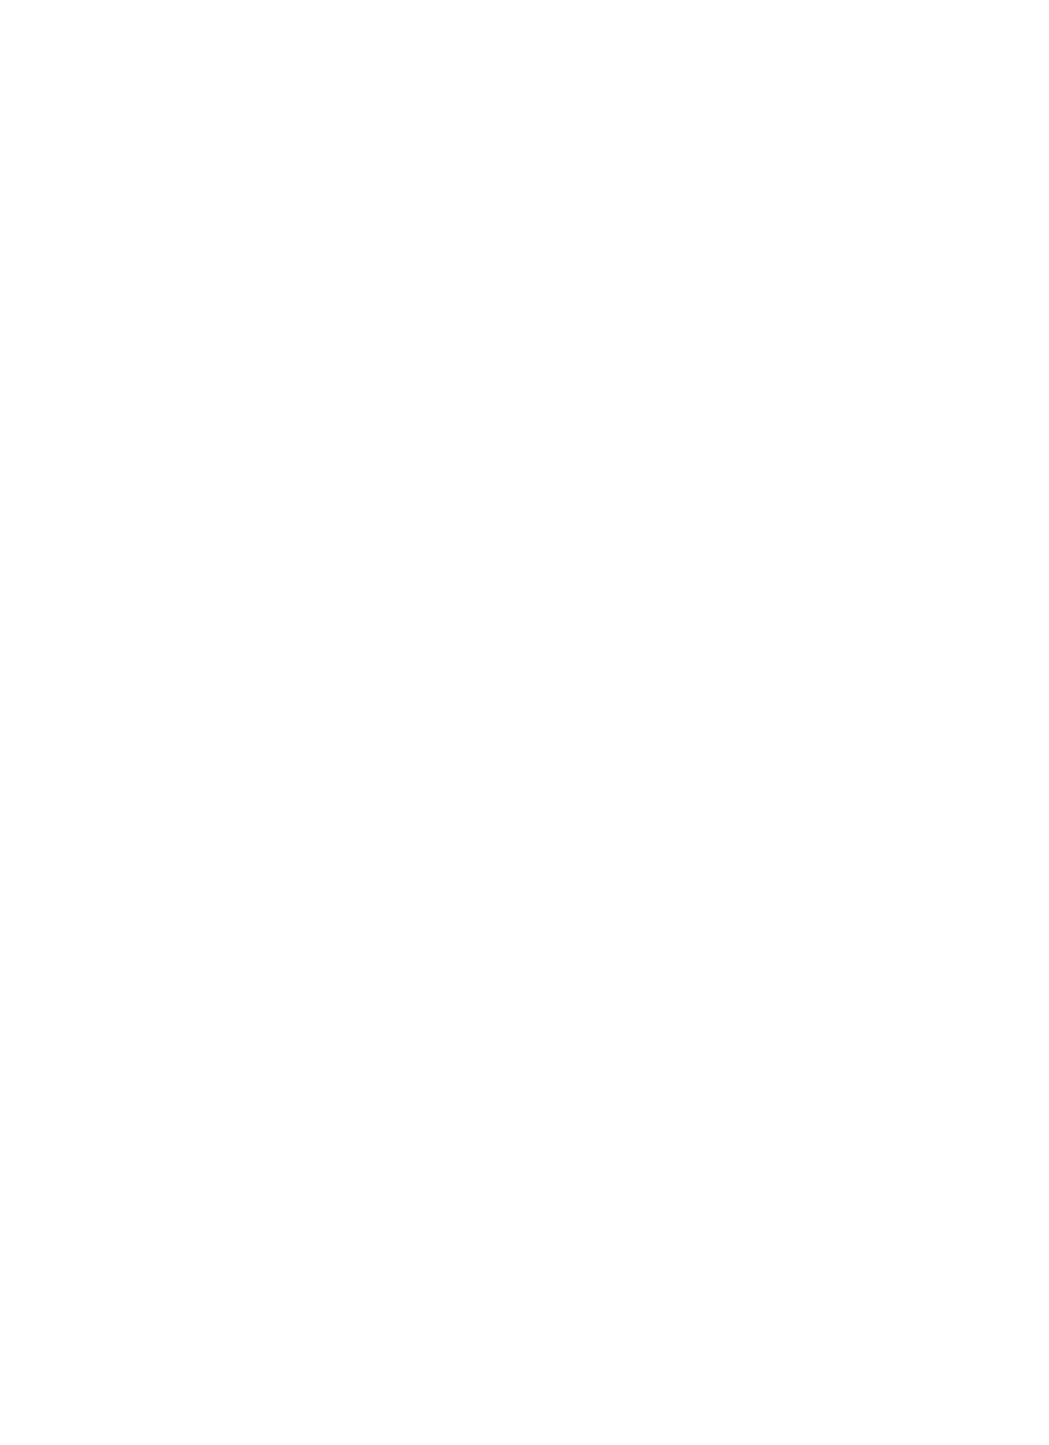 dwelling place project